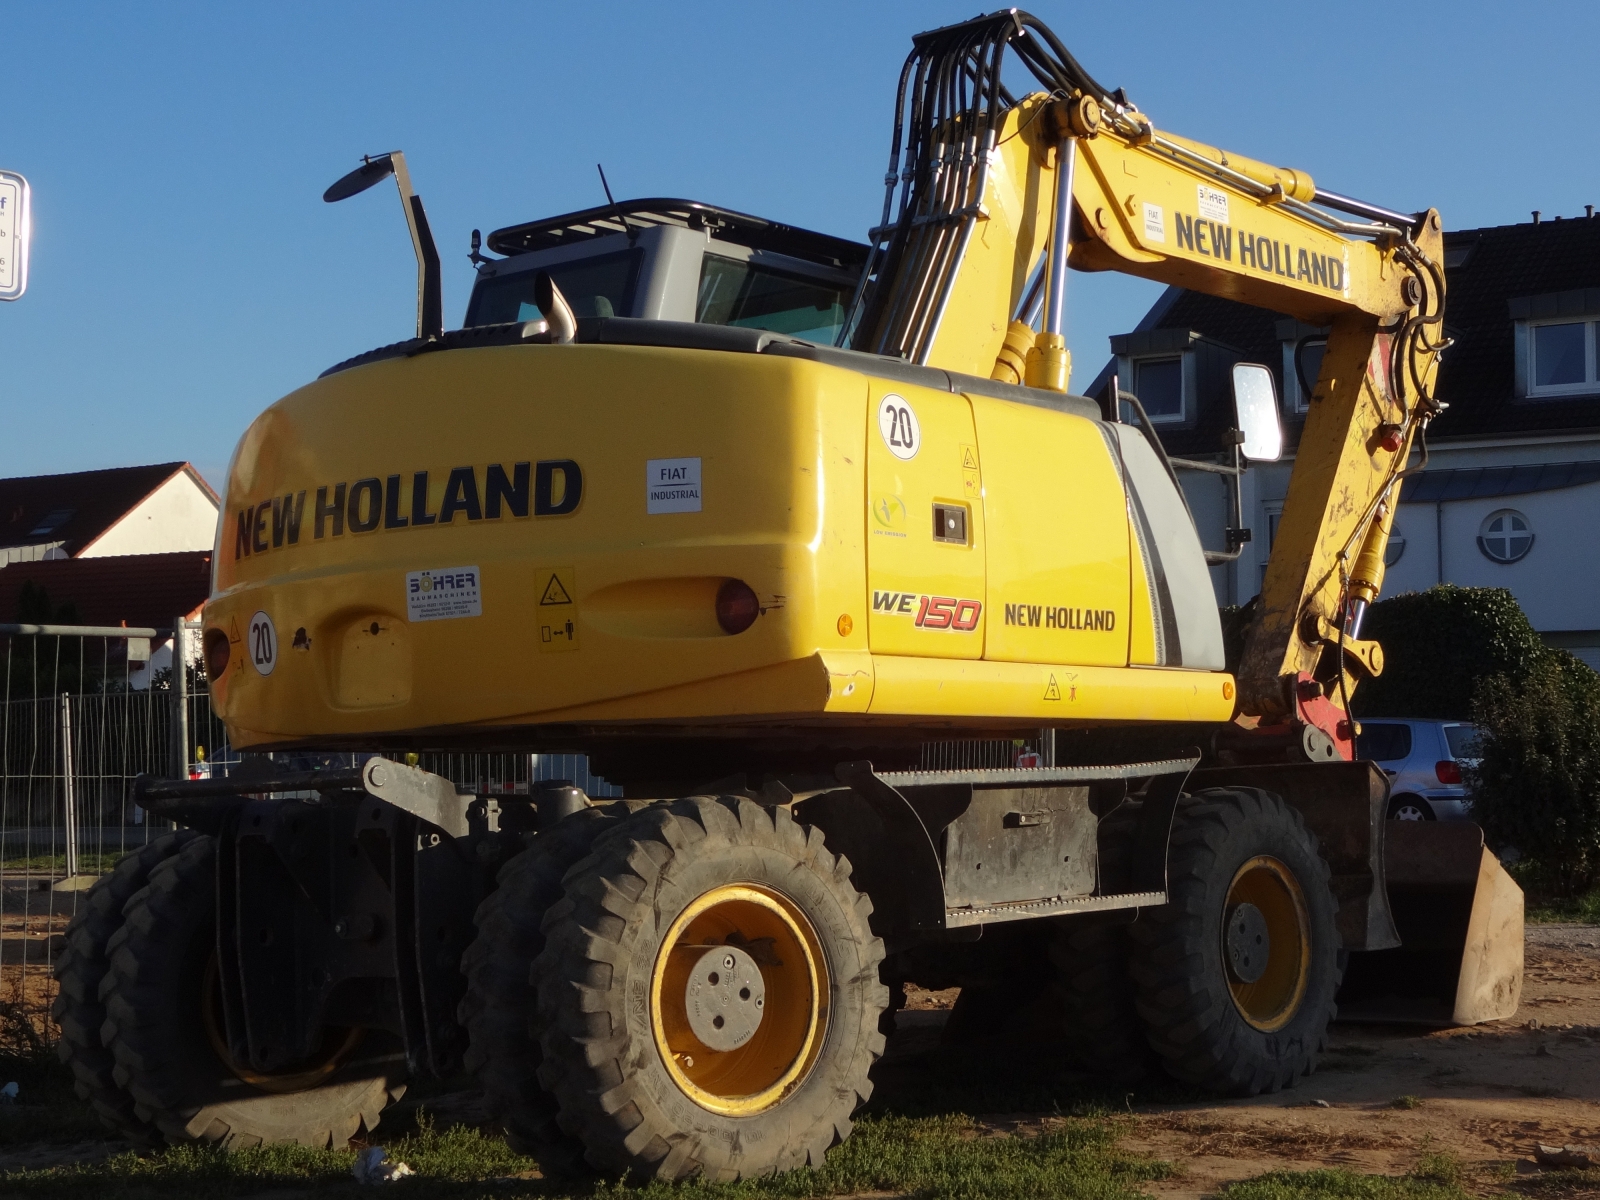 New Holland WE 150